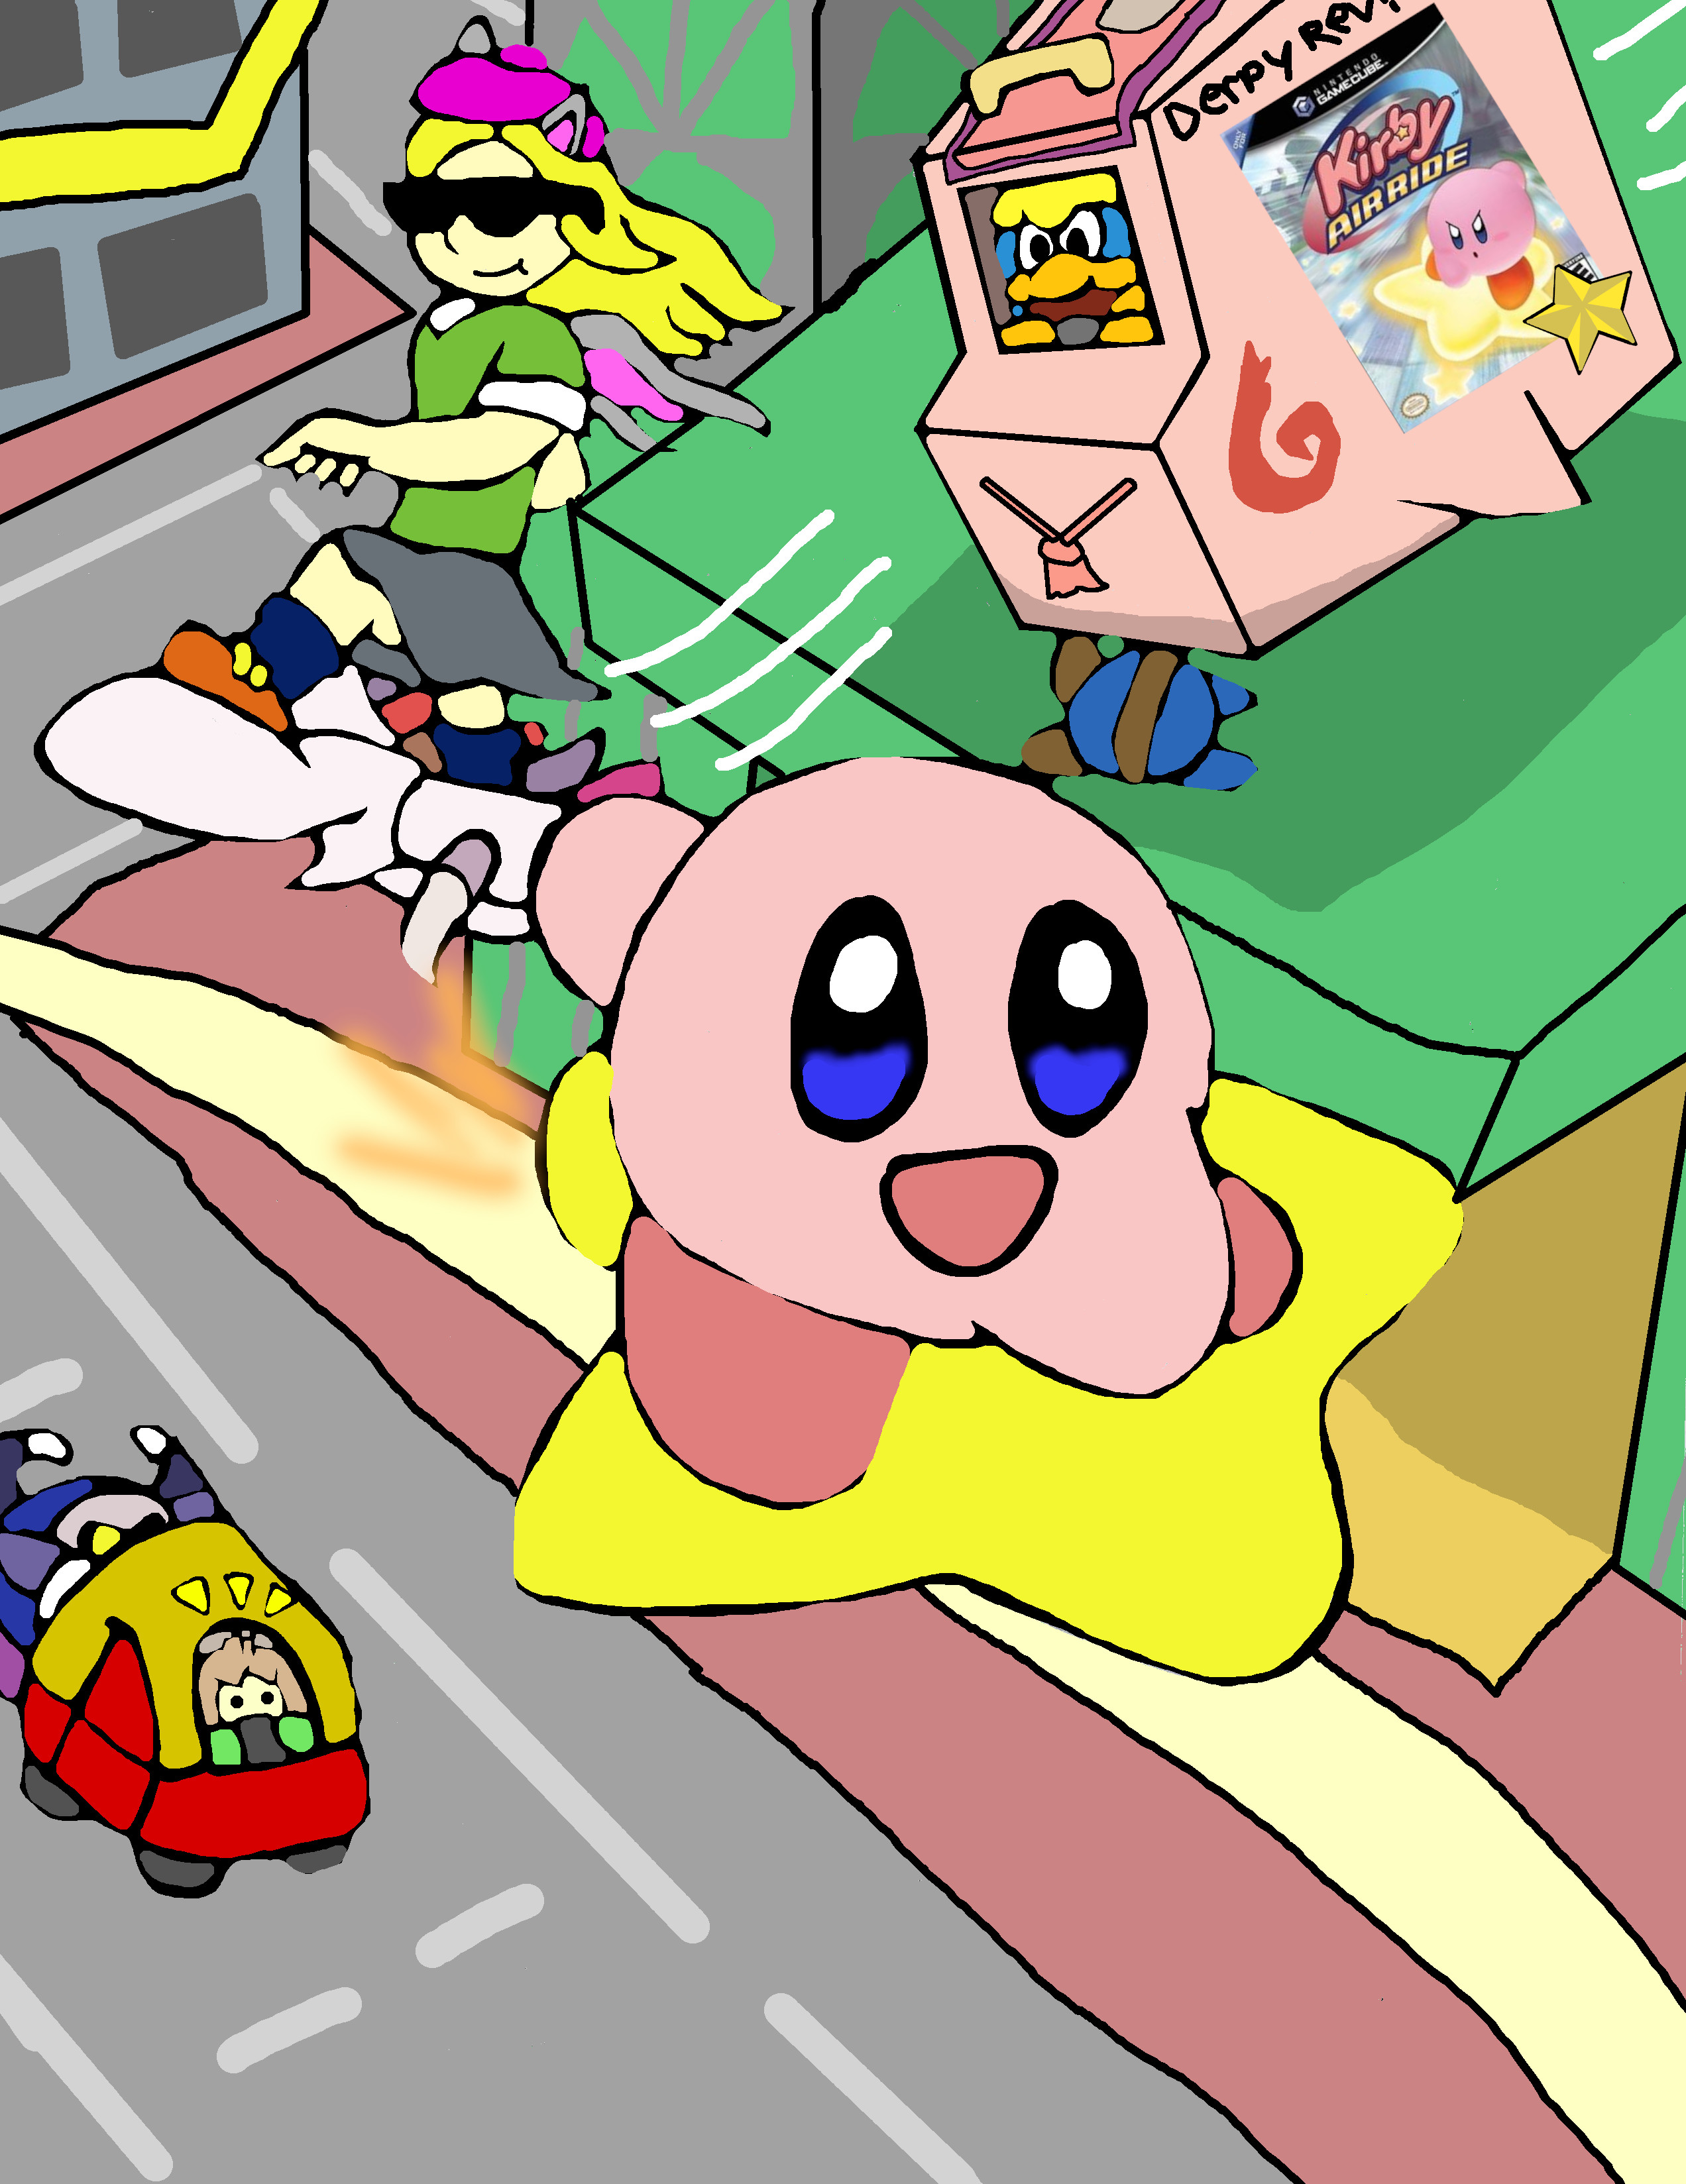 Derpy Review #44: Kirby's Air Ride by MicroGamer1 on DeviantArt